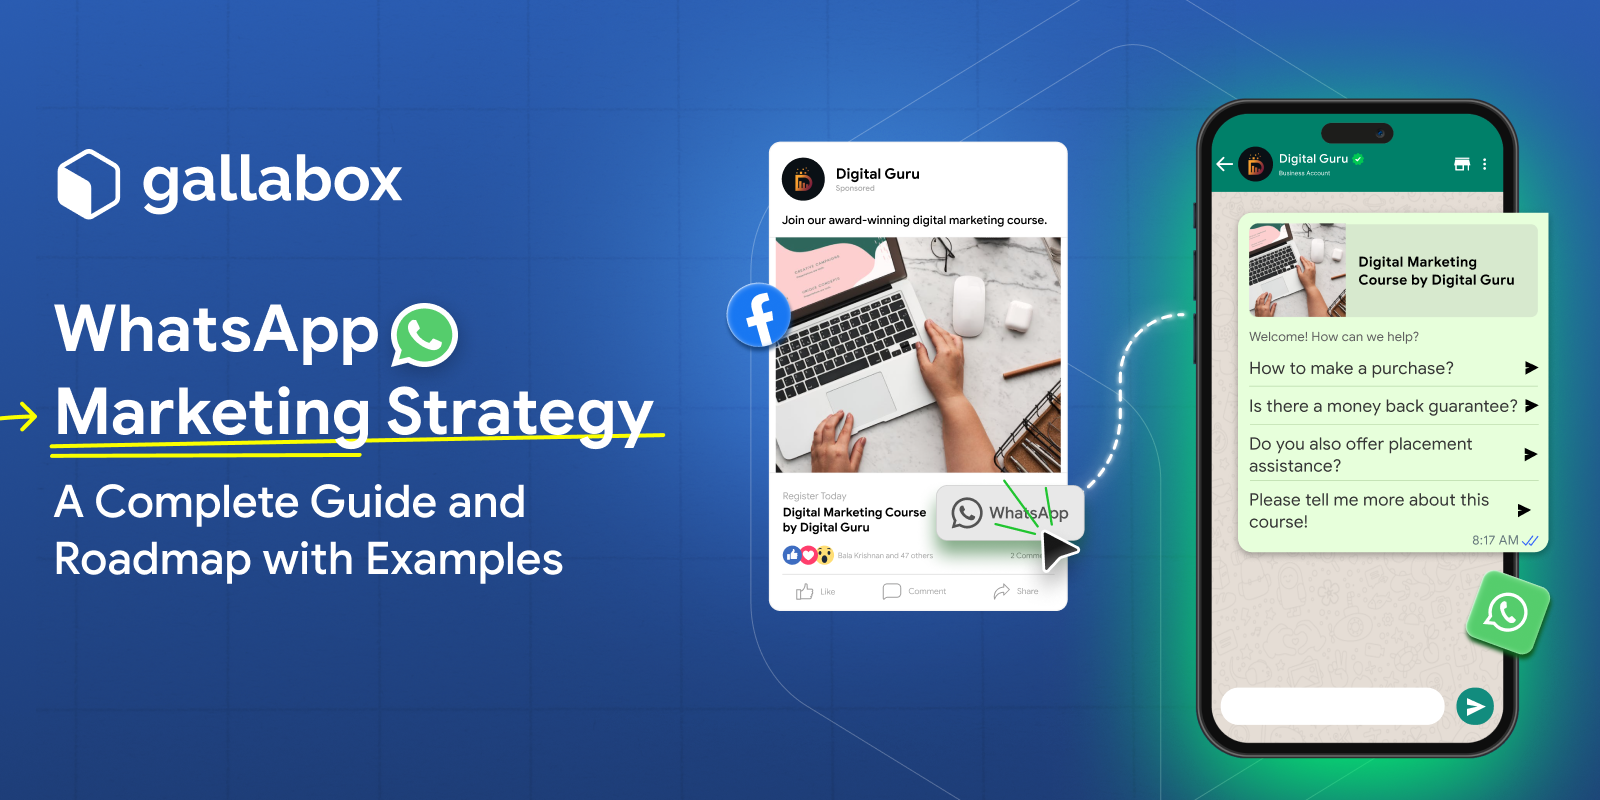 WhatsApp Marketing Strategy | A Complete Guide and Roadmap with Examples